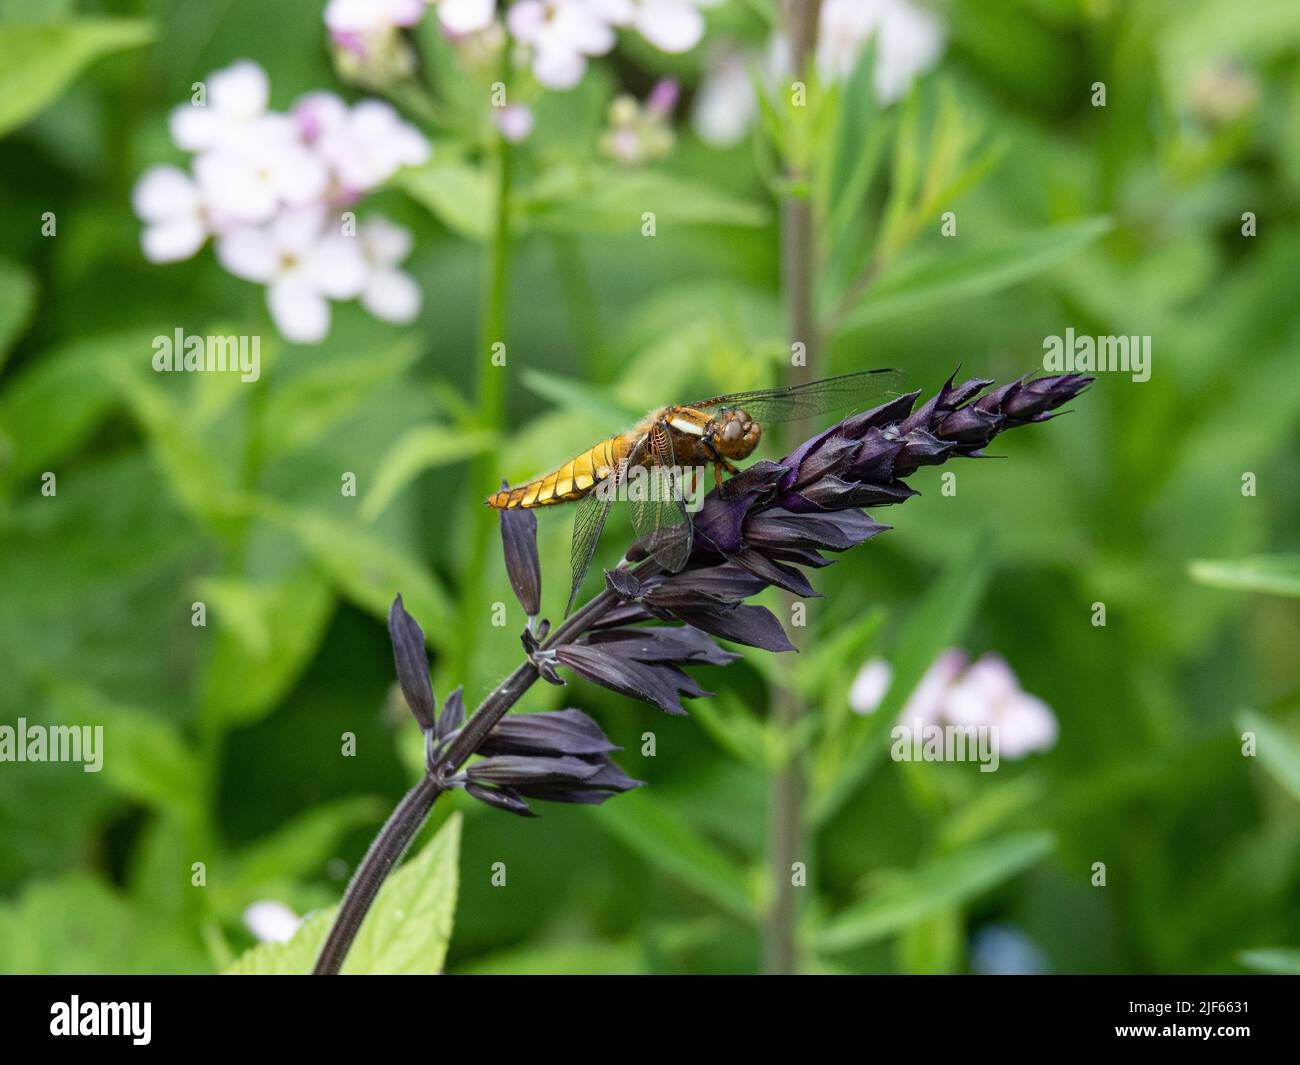 A gold and black striped broad chaser dragonfly (Libellula depressa) resting on a dark Salvia flower Stock Photo